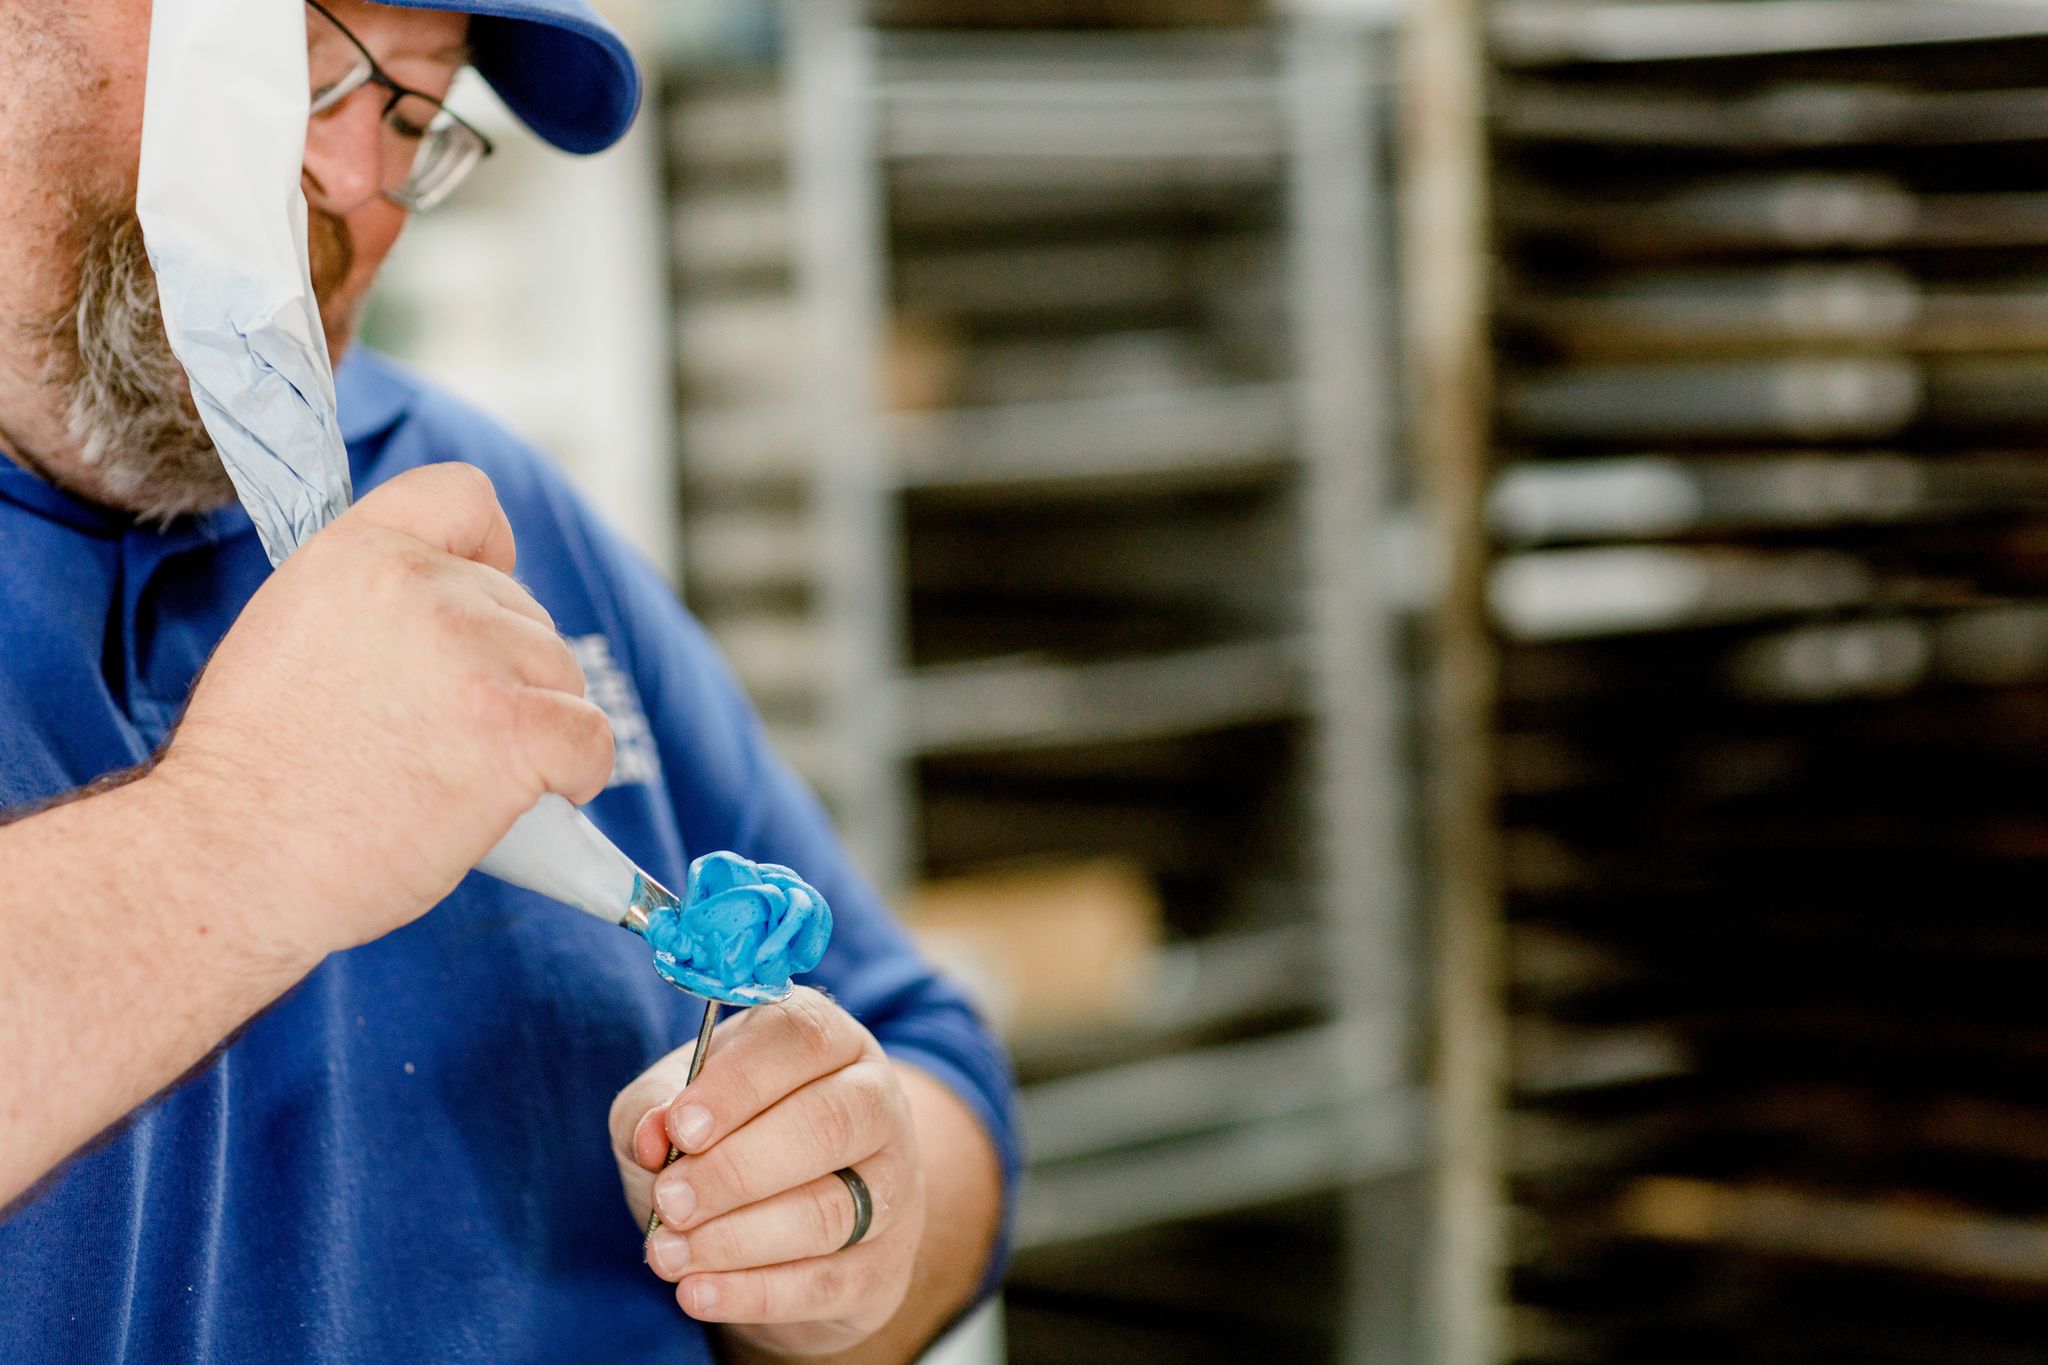 Ken Cagle Jr. pipes icing onto a cupcake at Sweet Shoppe Bakery.